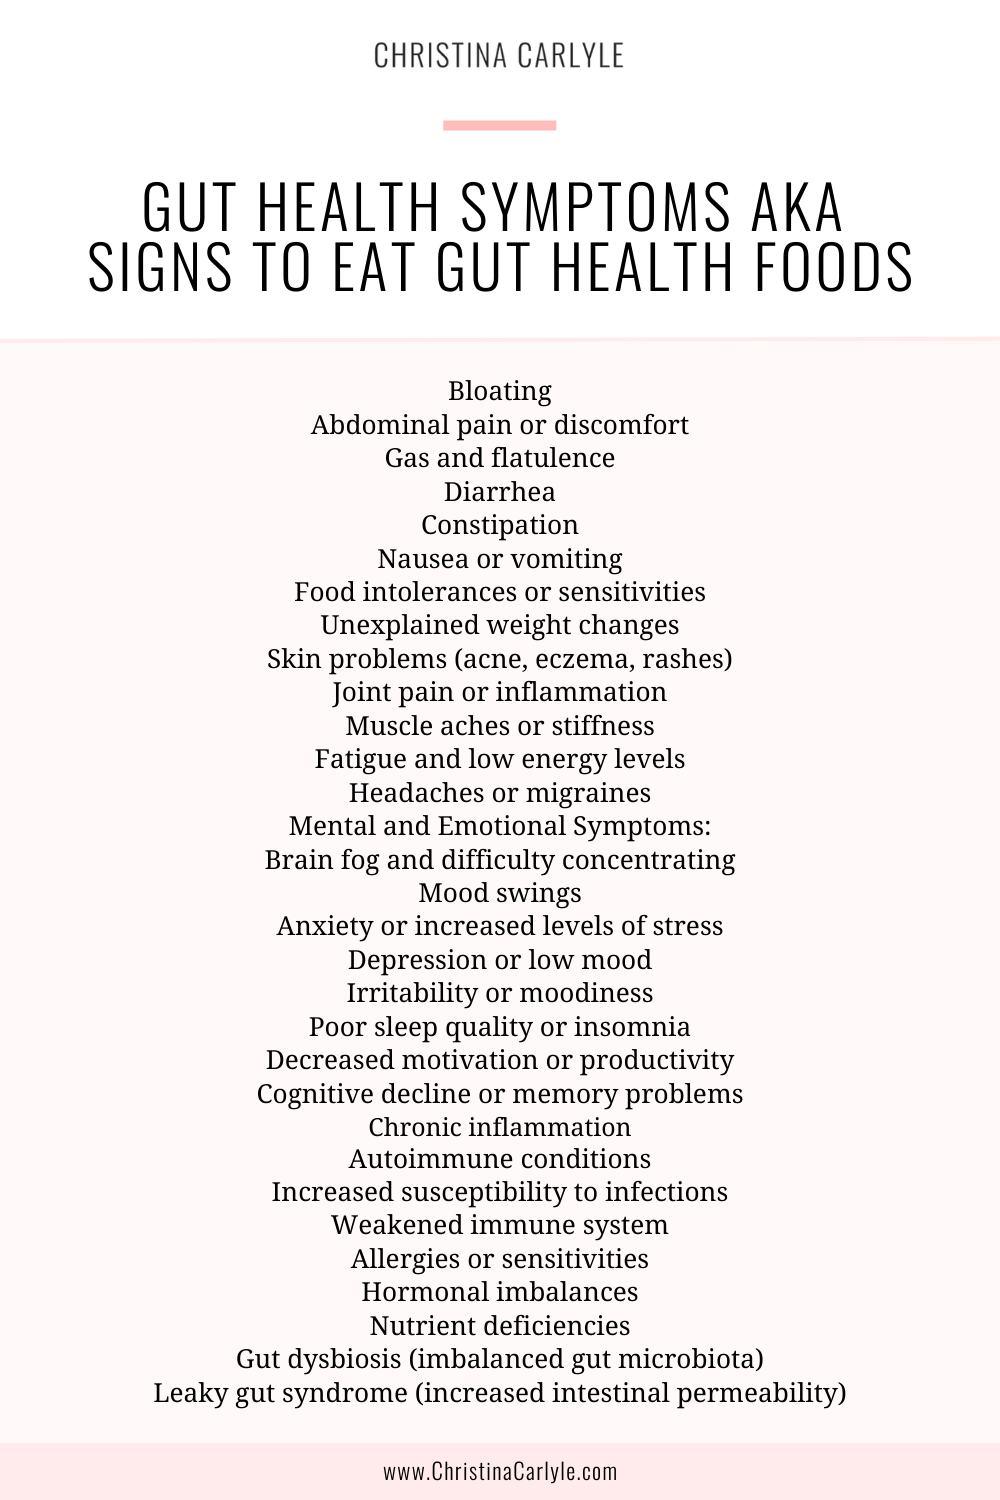 a list of gut health issue symptoms and text that says Gut Health Symptoms AKA Signs to Eat Gut Health Foods